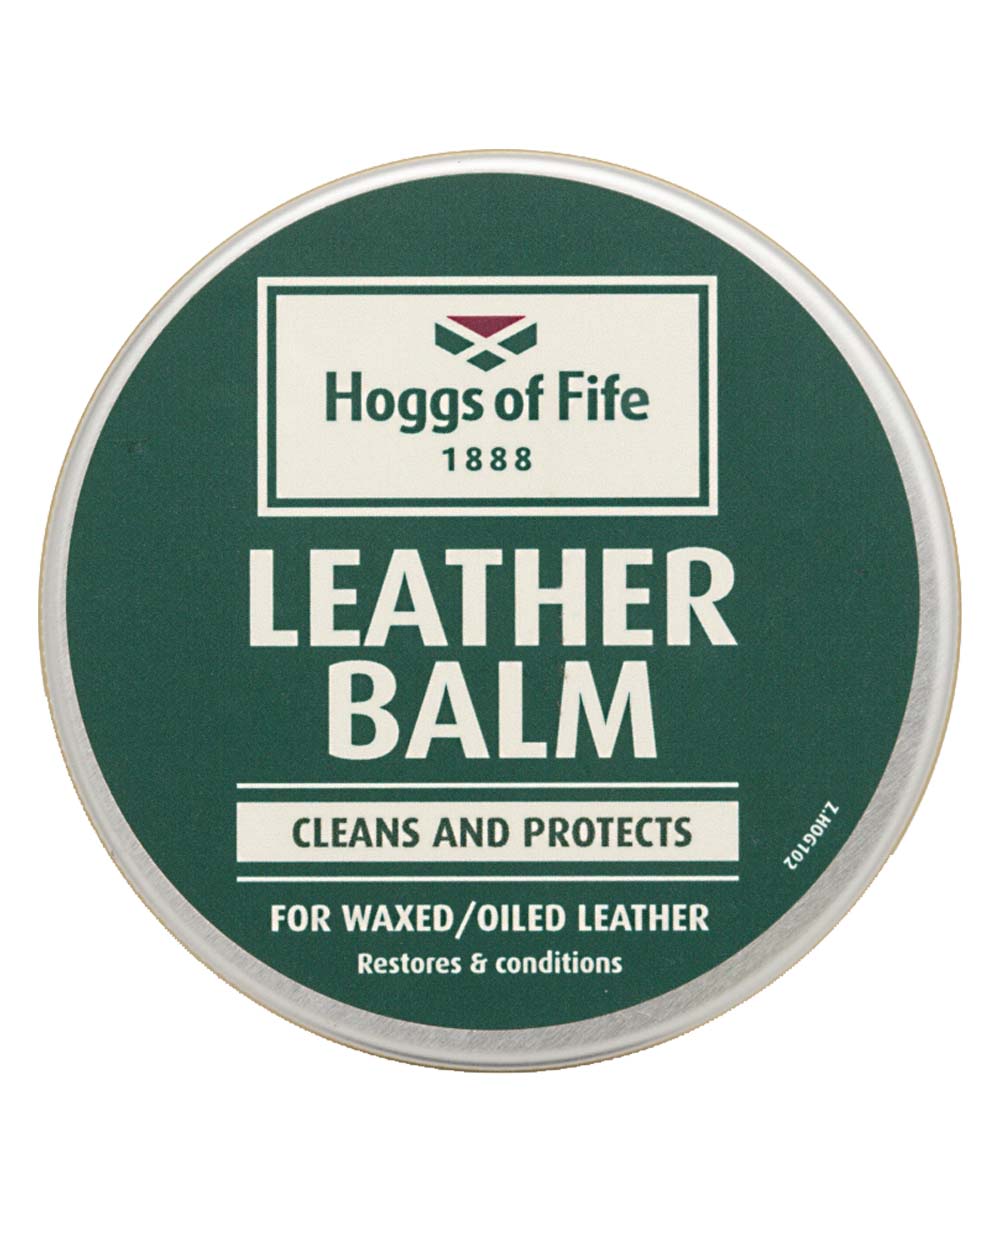 Hoggs of Fife Waxed Leather Balm Tin on White background